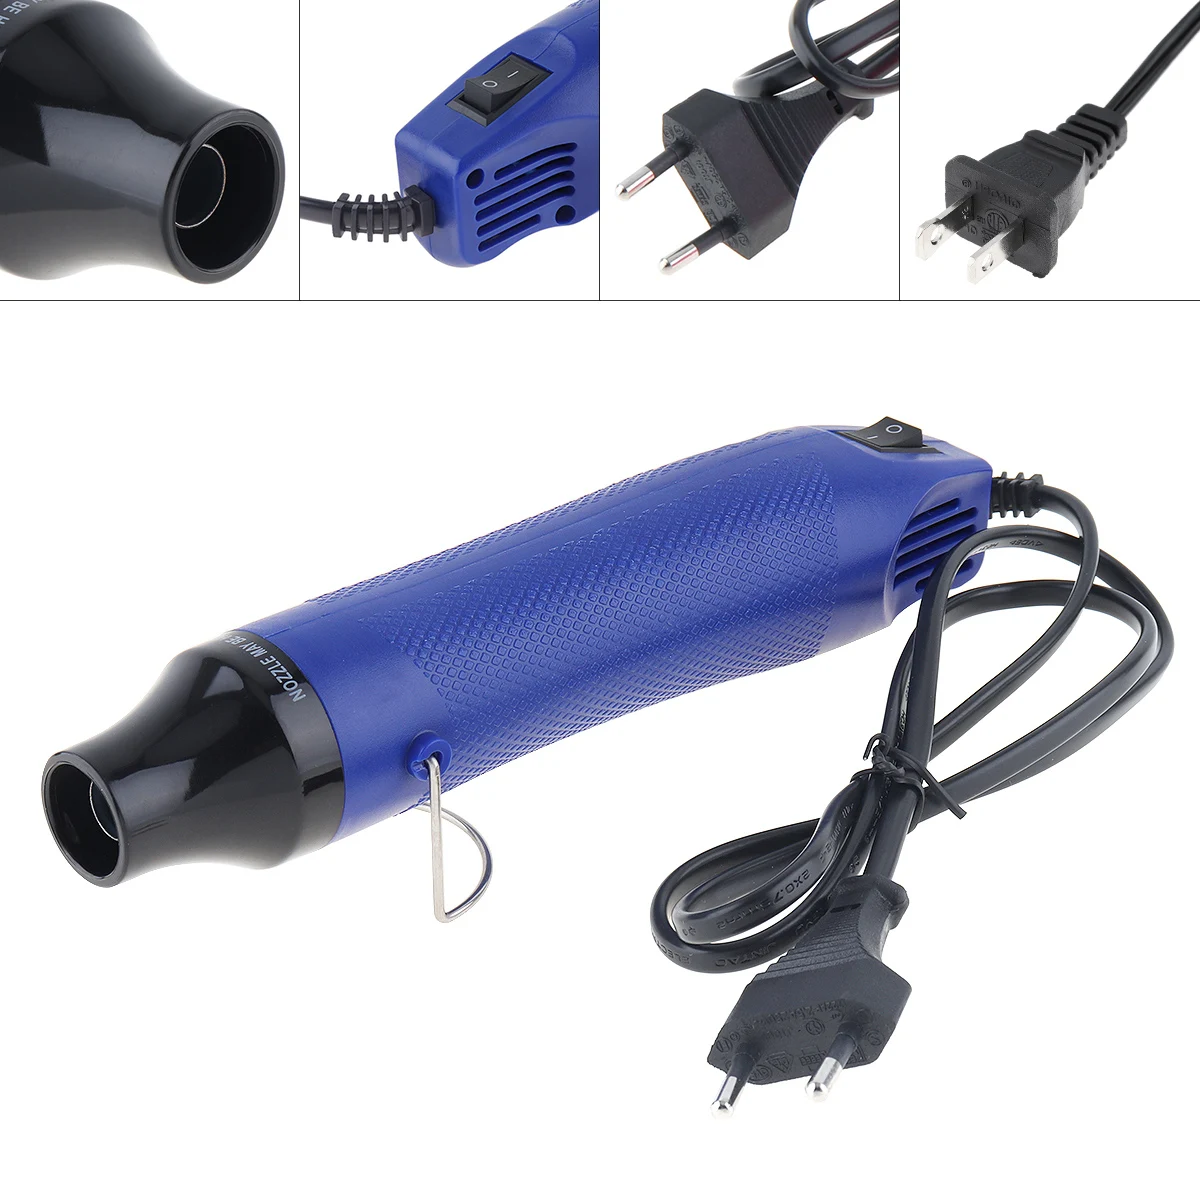 110V / 220V 300W Heat Gun Electric Blower Handmade with Shrink Plastic Surface and EU / US Plug for Heating DIY Accessories 3500w 16a digital plug in temperature controller intelligent high accuracy heating cooling ntc sensor ac110 220v lcd thermostat